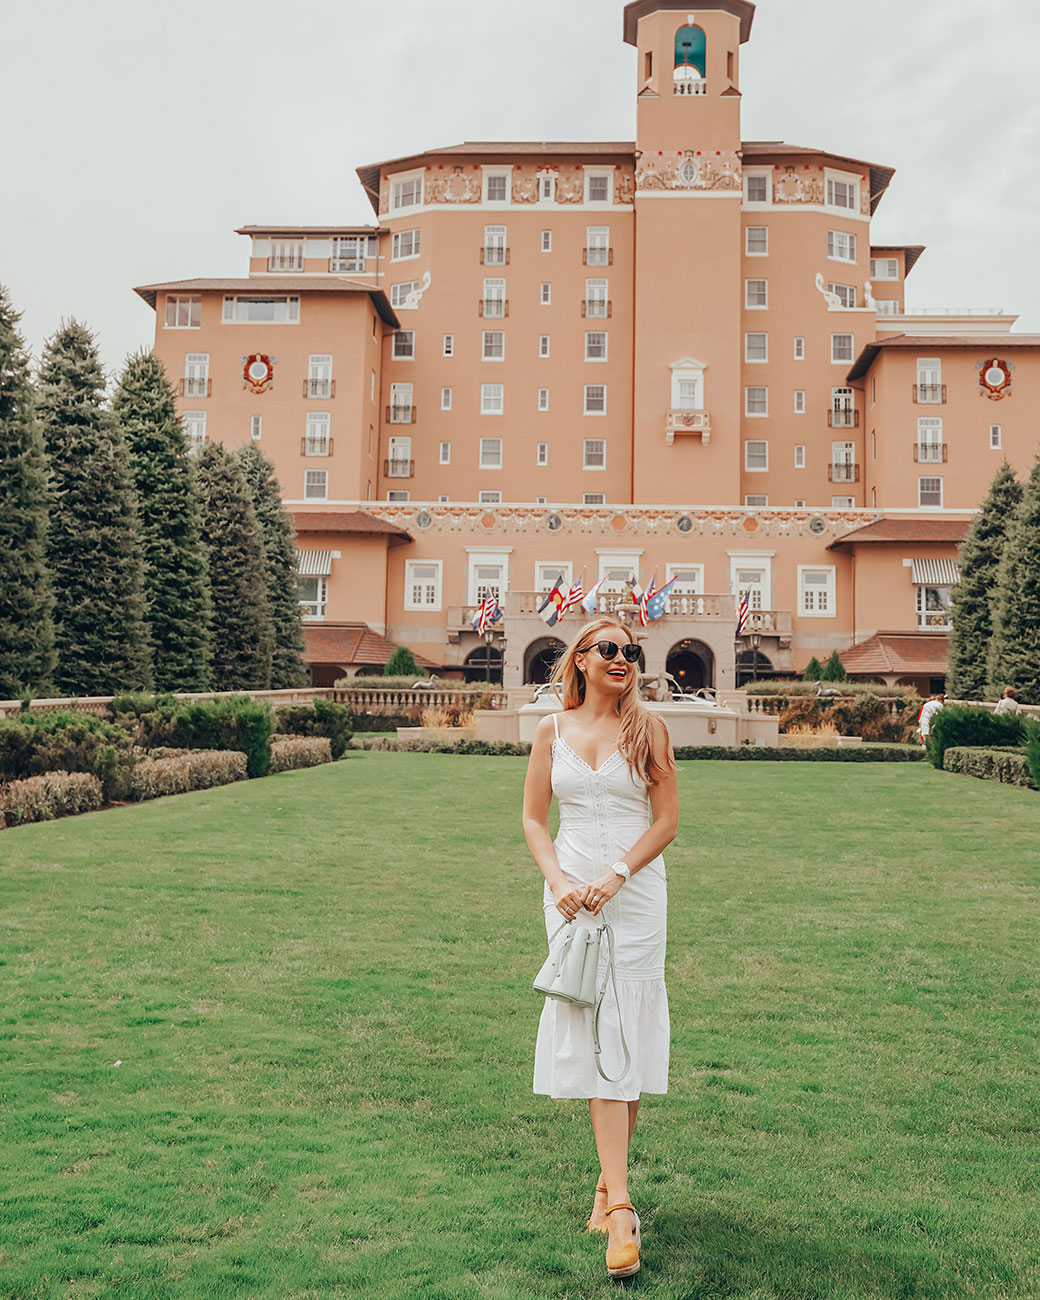 Five-Star Family Fun At The Broadmoor ⋆ Every Avenue Travel